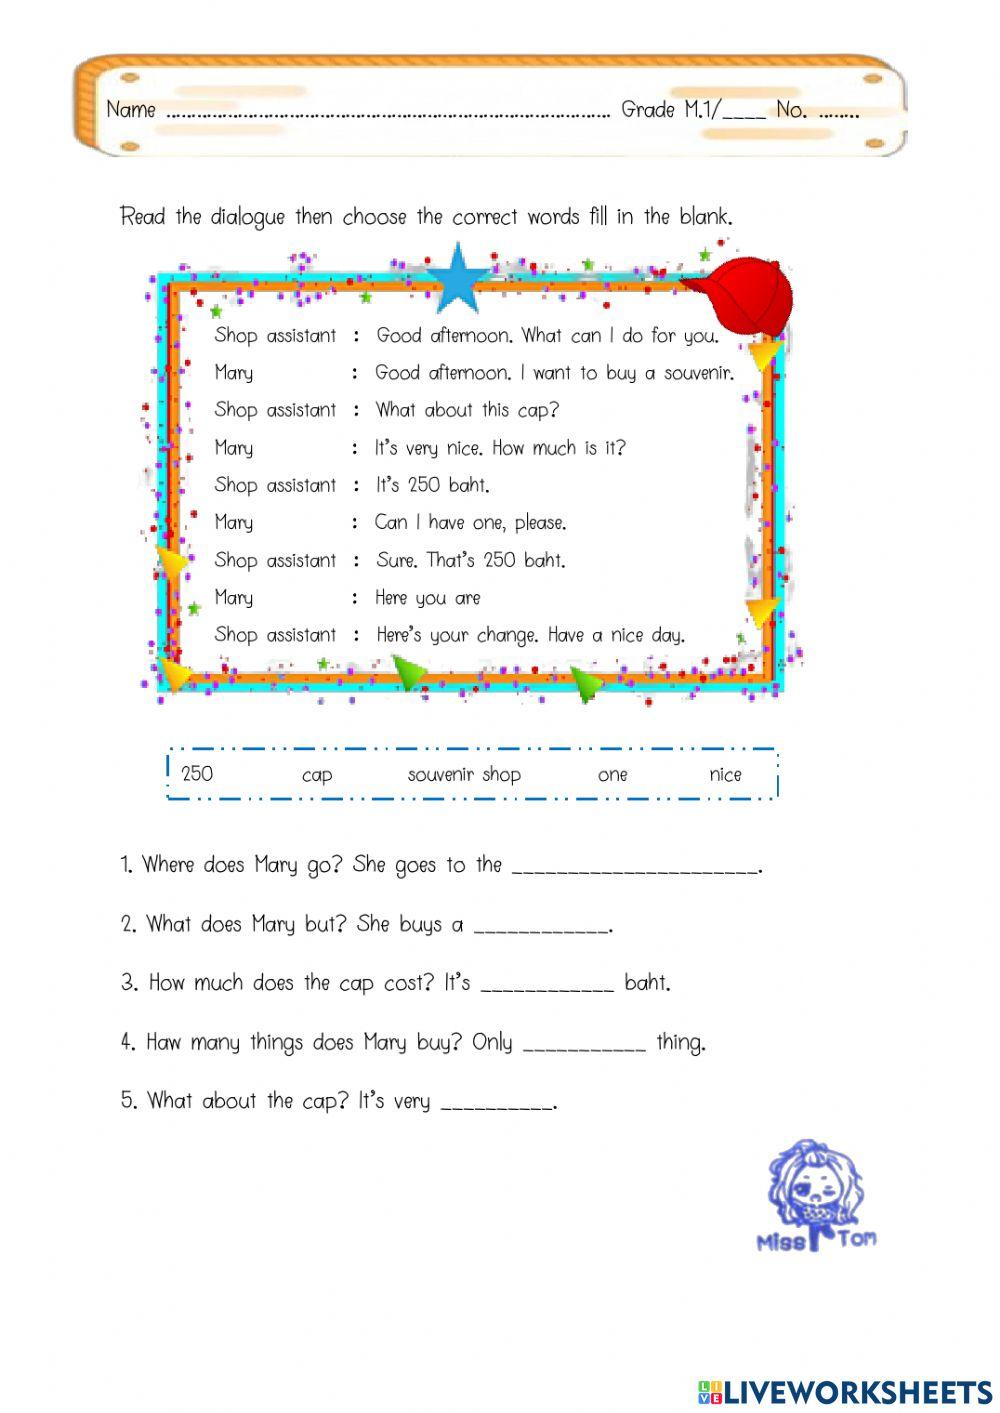 Read the dialogue then choose the correct words fill in the blank. worksheet  | Live Worksheets